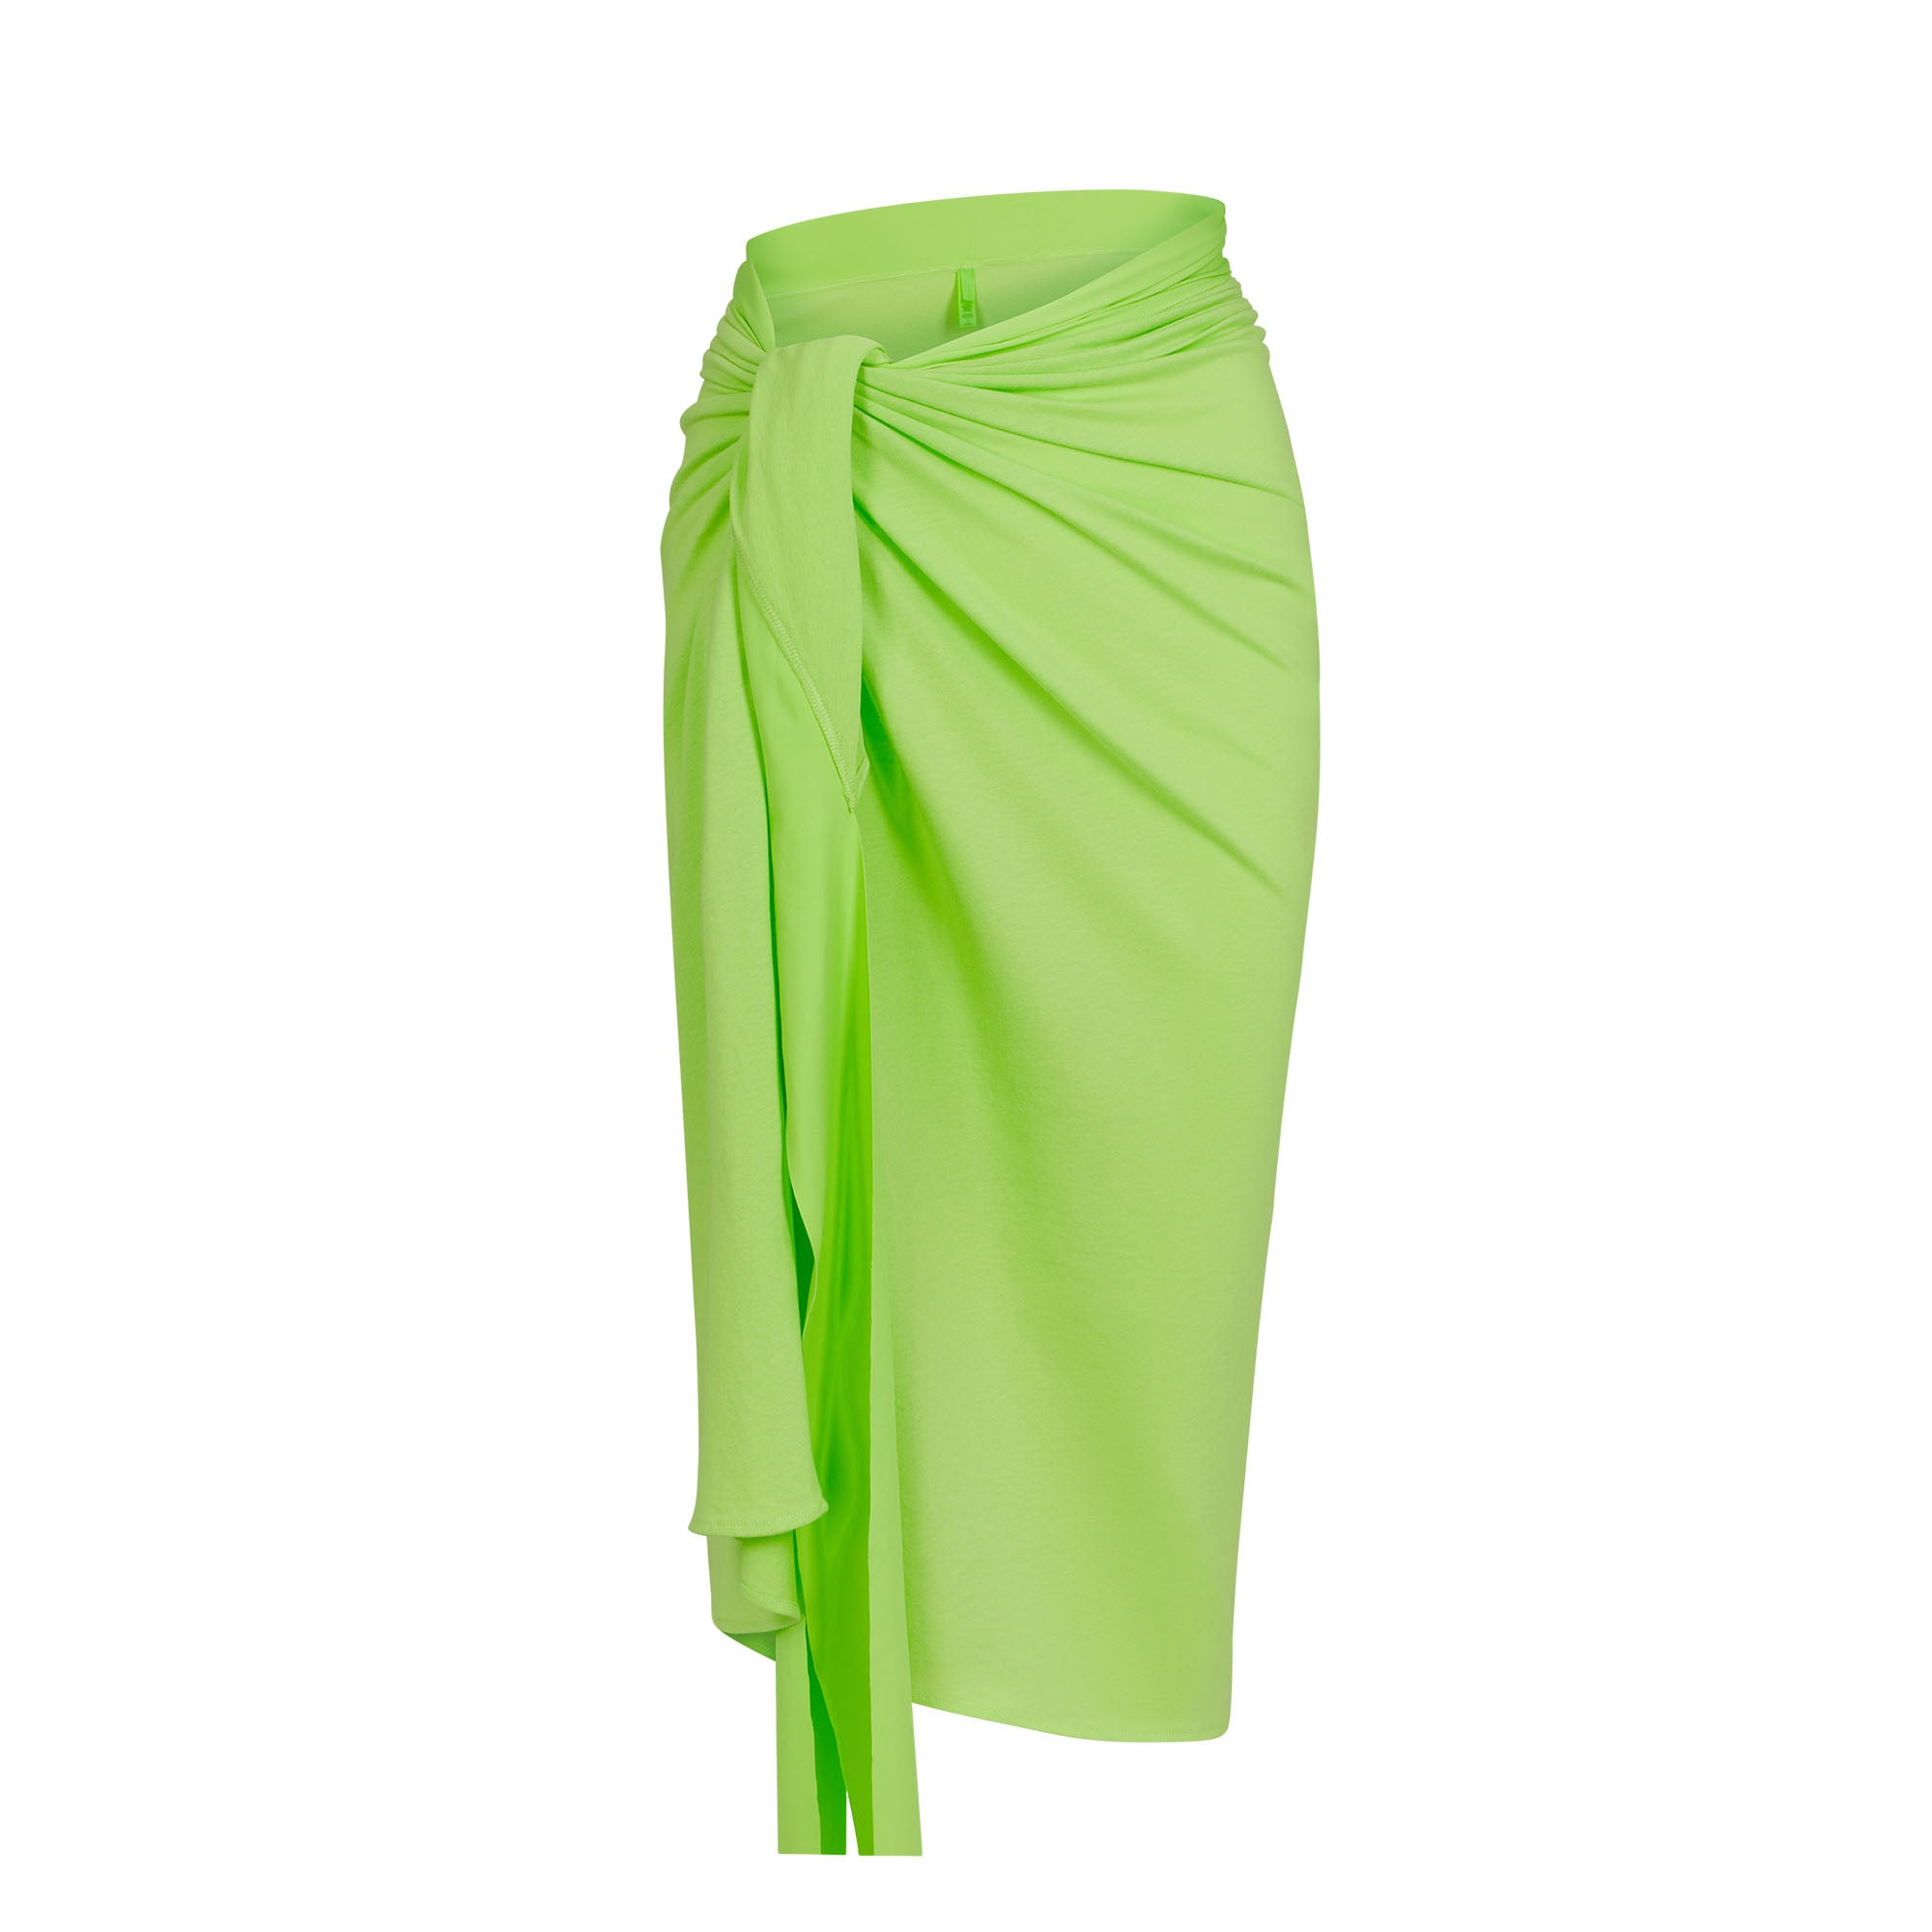 COVER UP TIE SARONG SKIRT | NEON GREEN - COVER UP TIE SARONG SKIRT ...